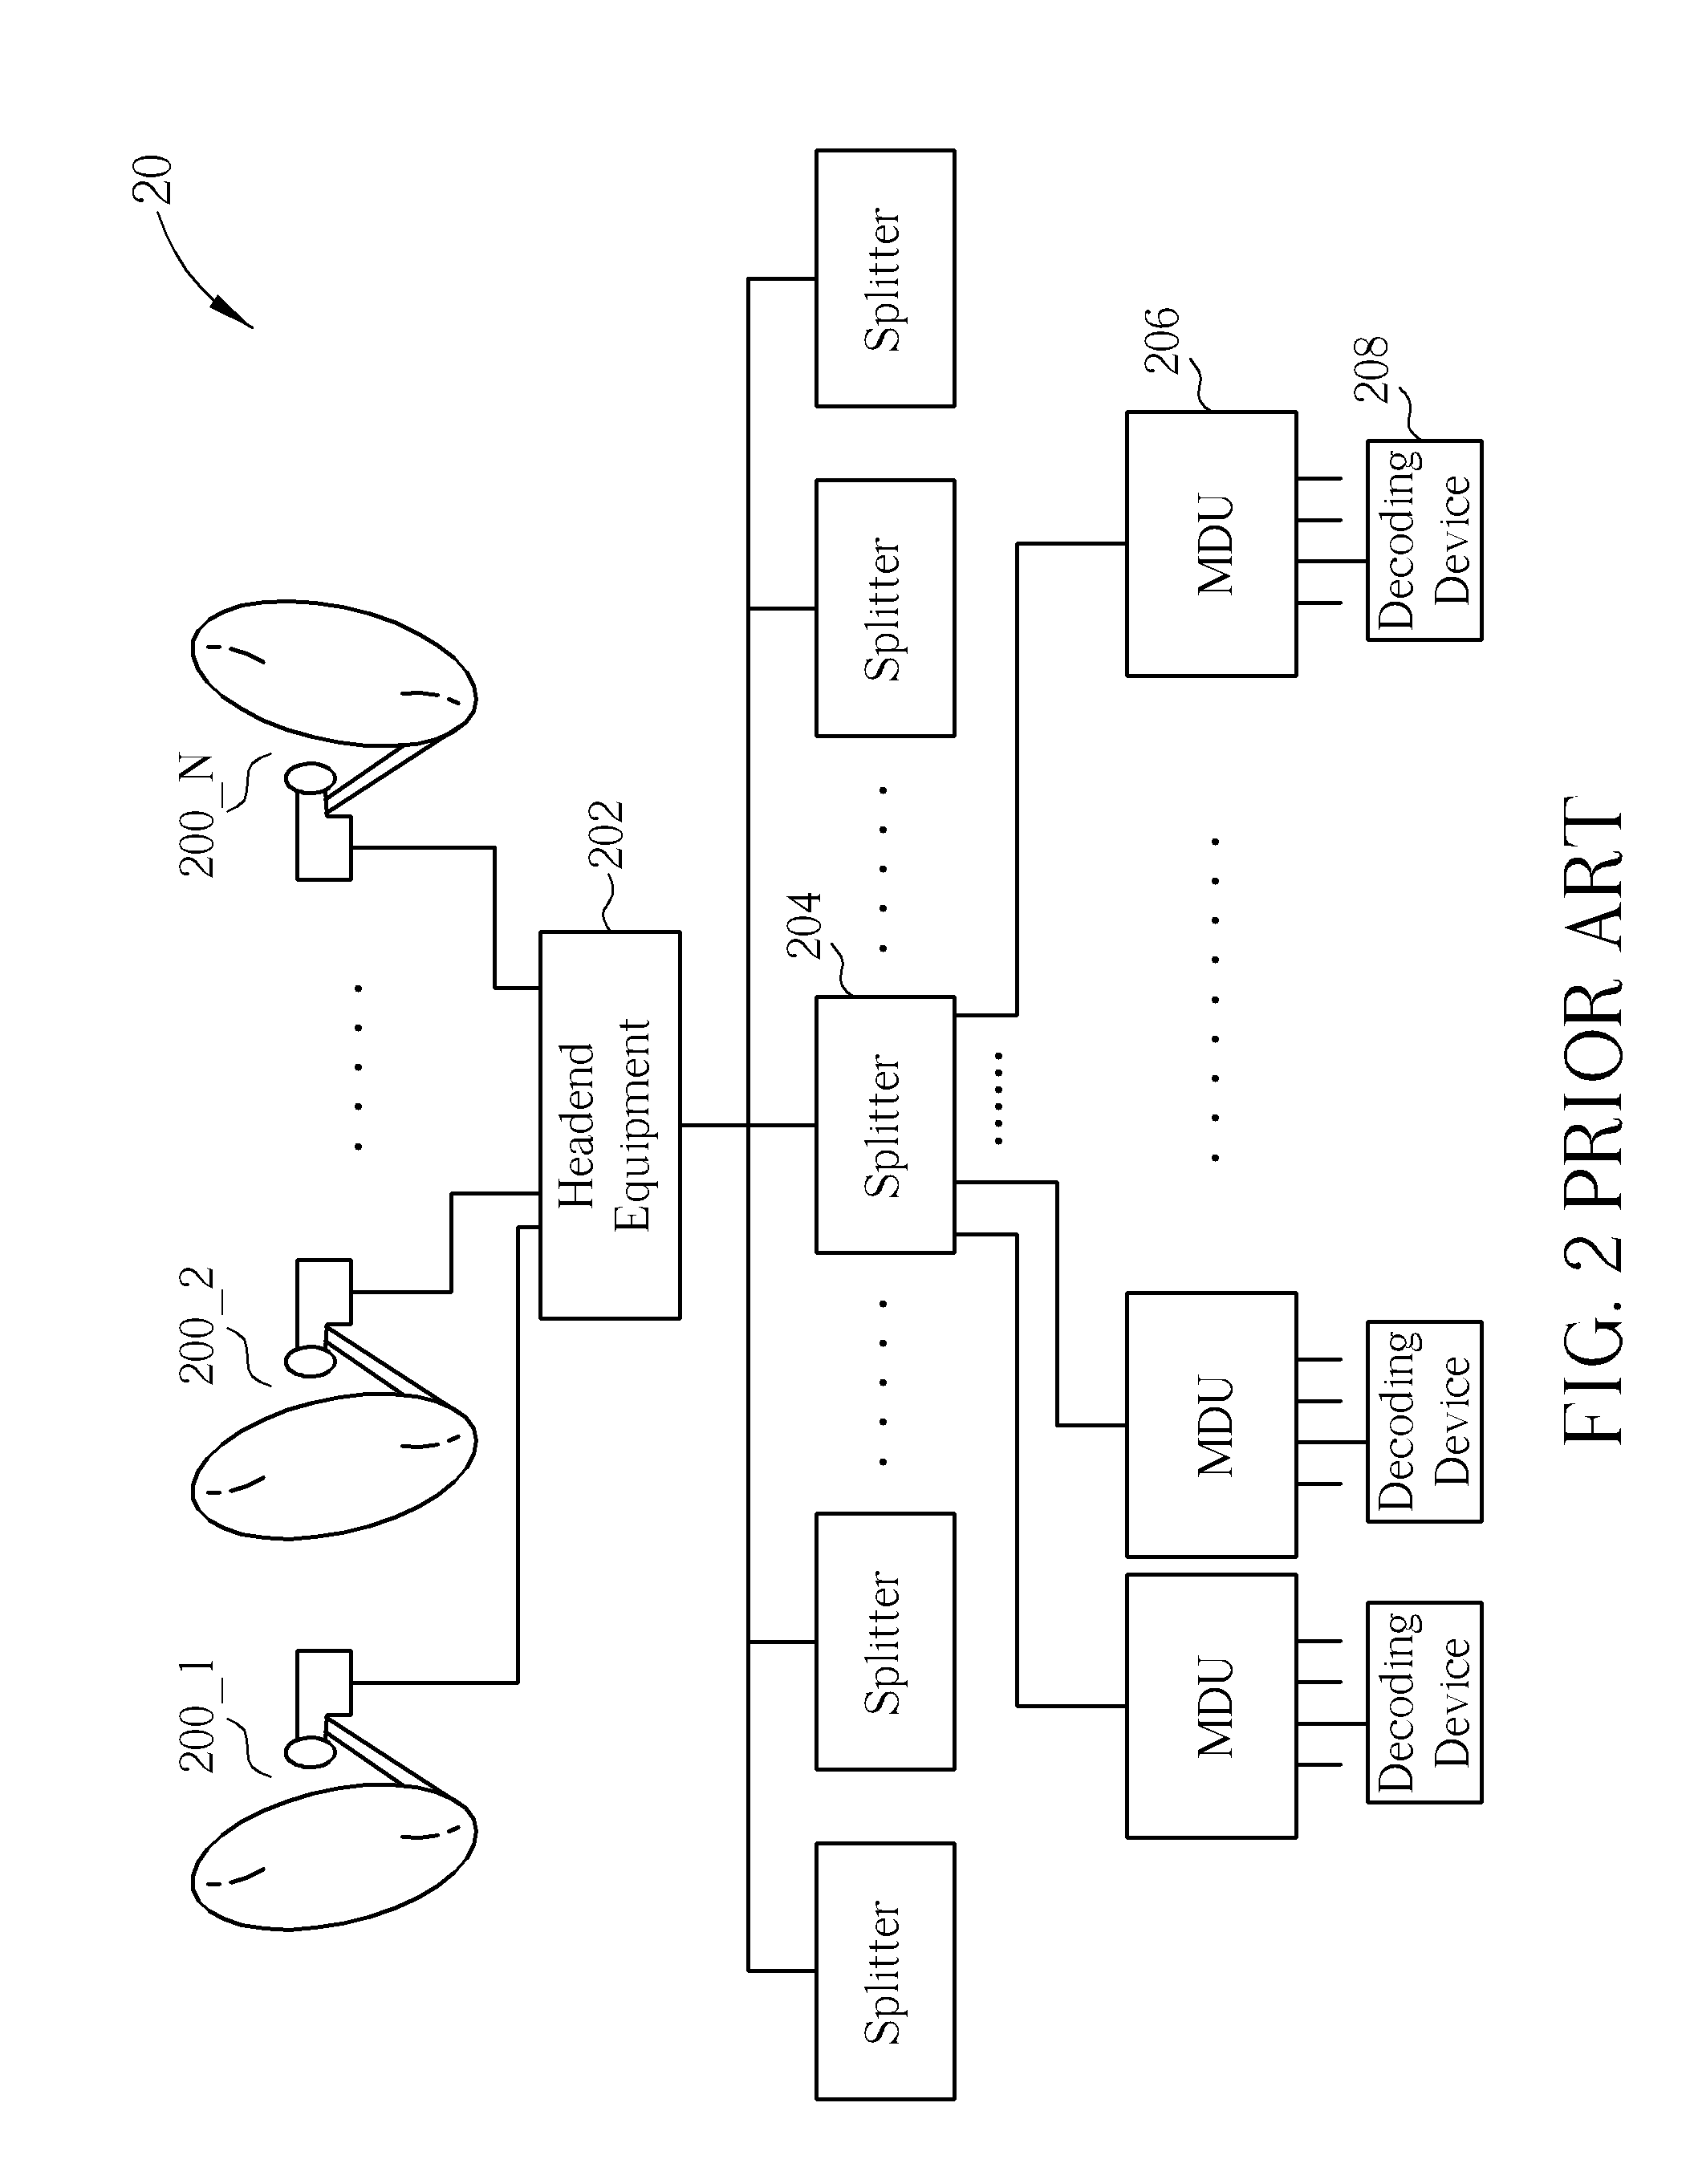 Optical Low-Noise Block Downconverter, Multiple Dwelling Unit, and Related Satellite Television System